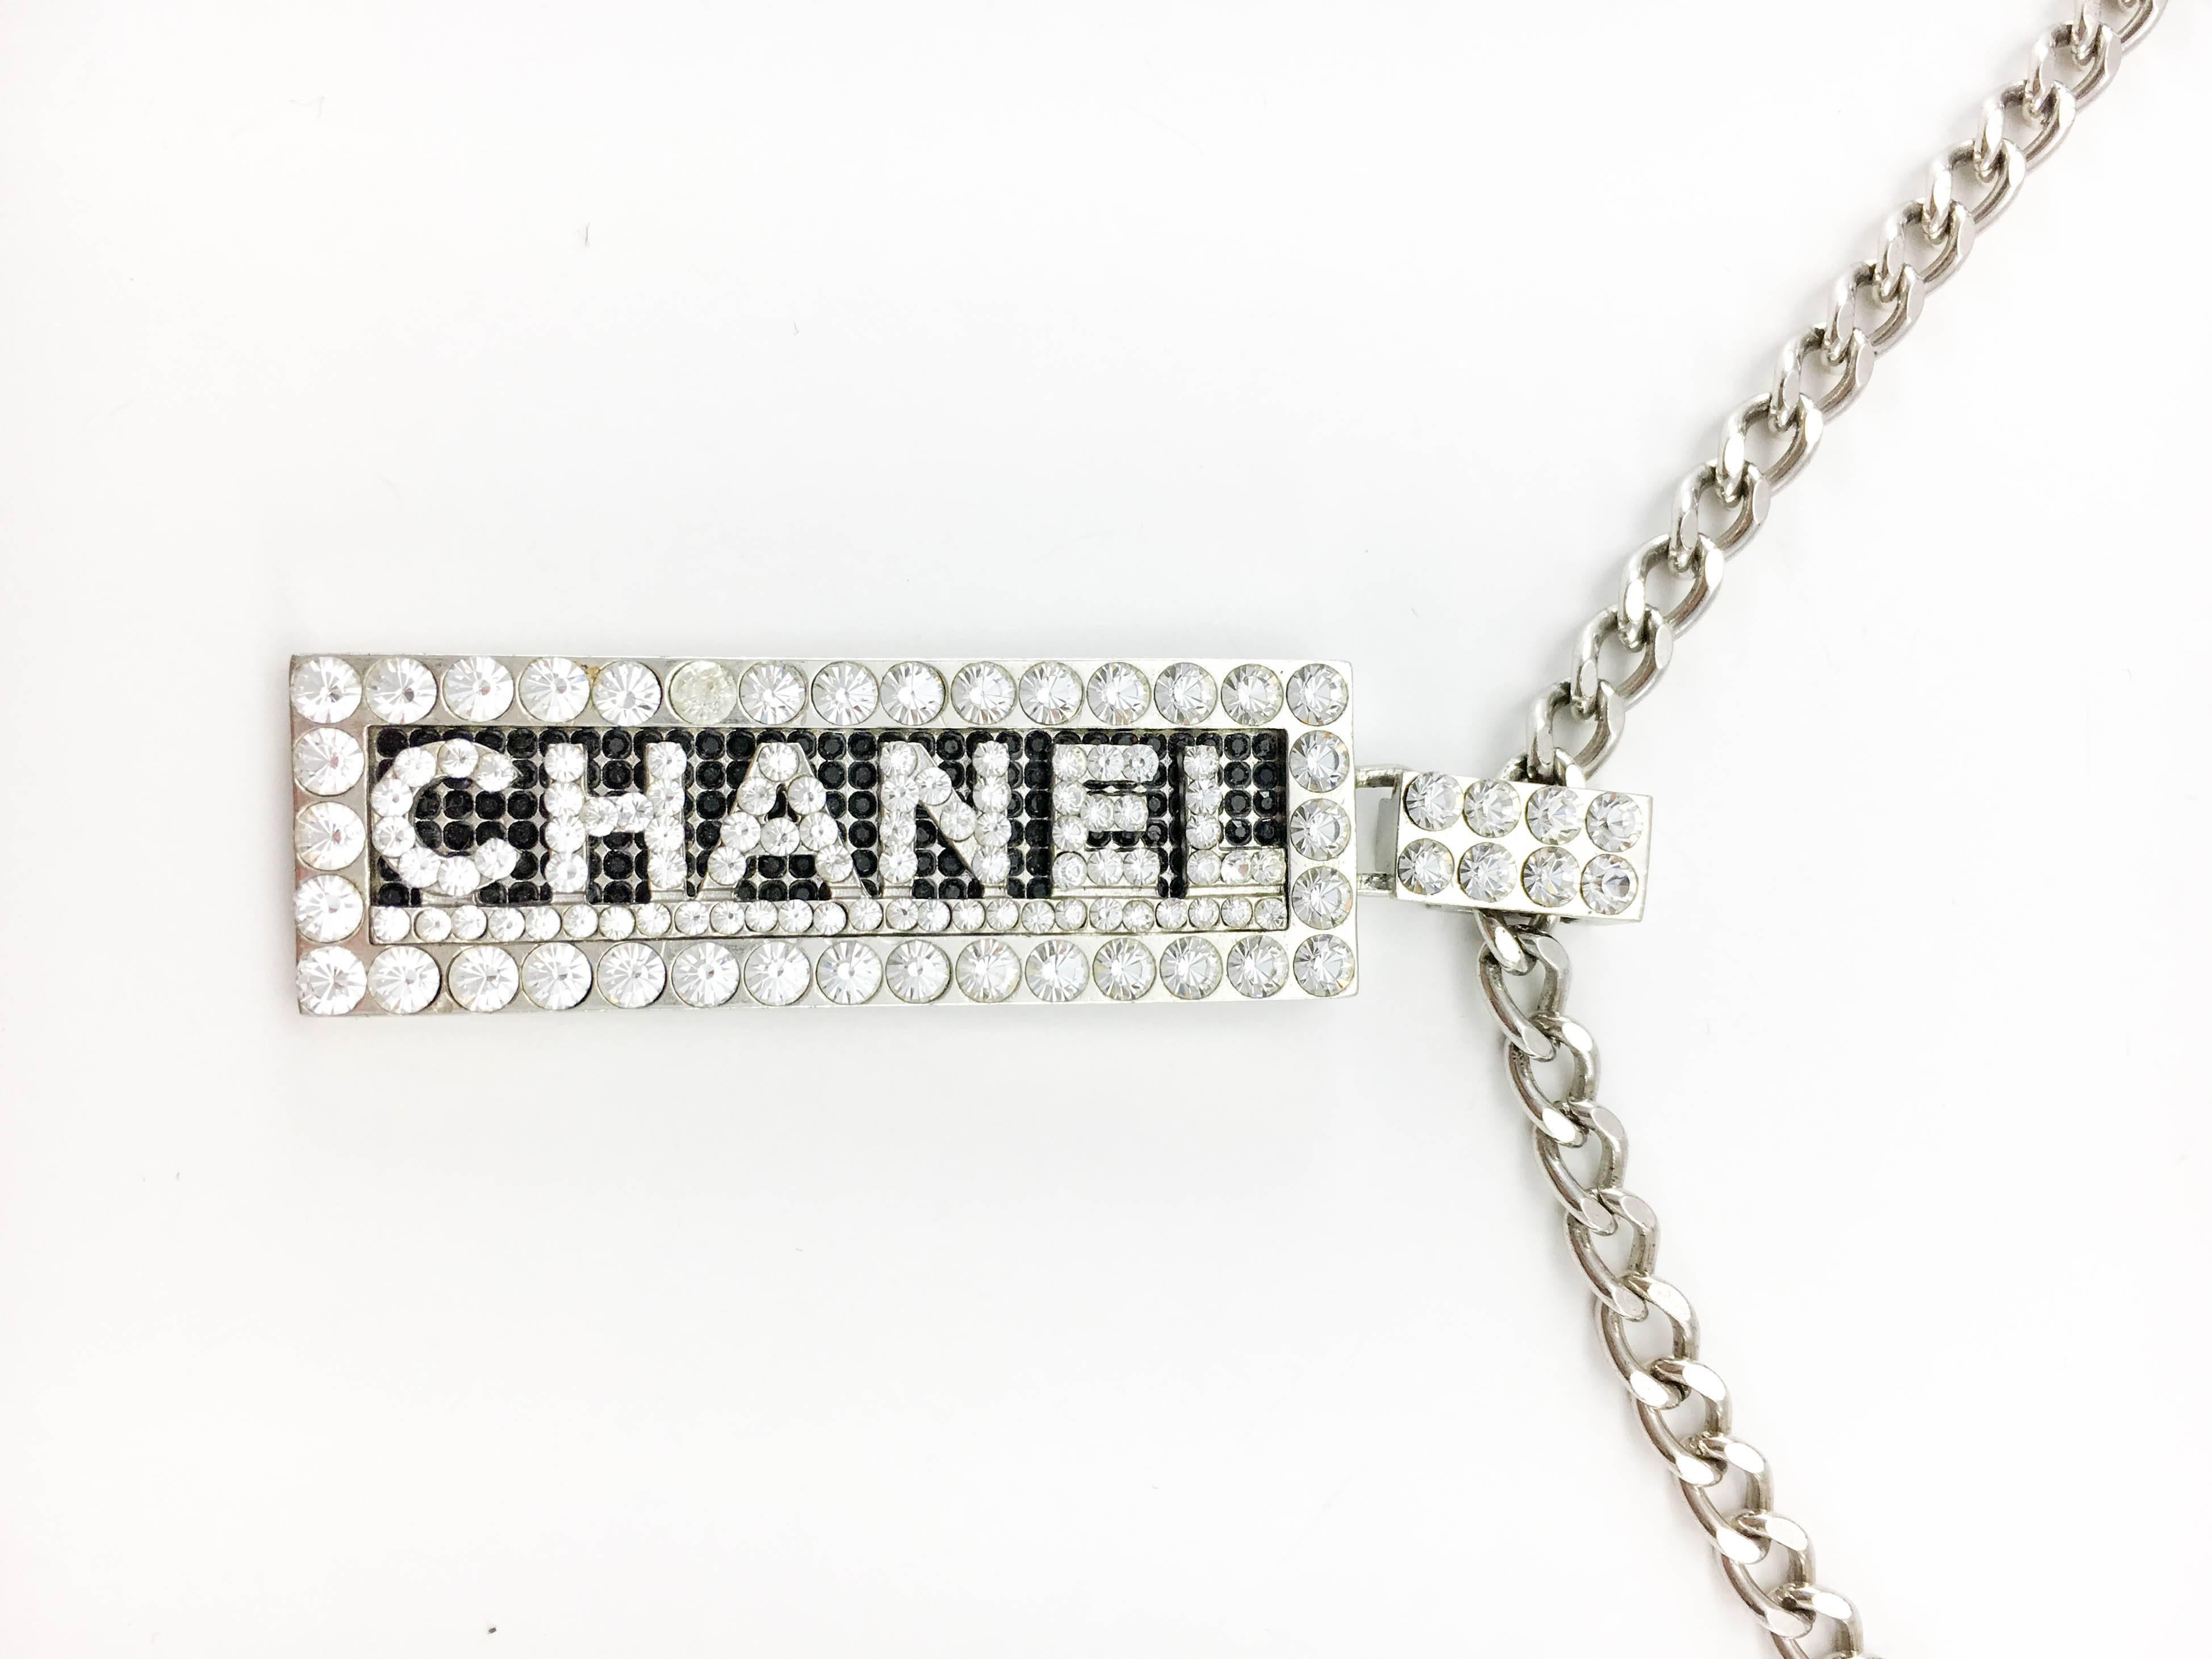 2003 Chanel Necklace With Rhinestone Chanel Plaque Pendant 2